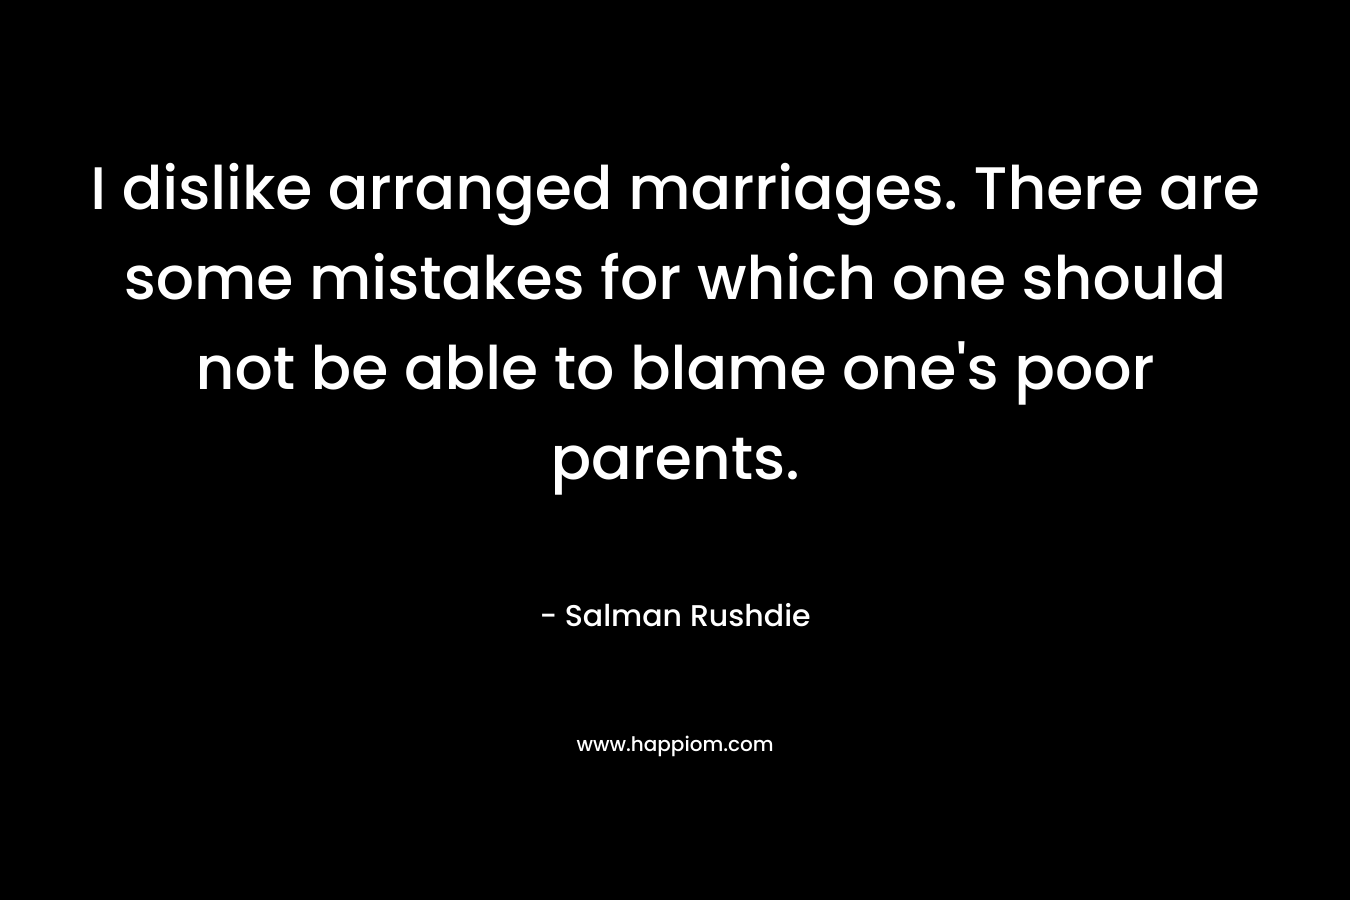 I dislike arranged marriages. There are some mistakes for which one should not be able to blame one's poor parents.